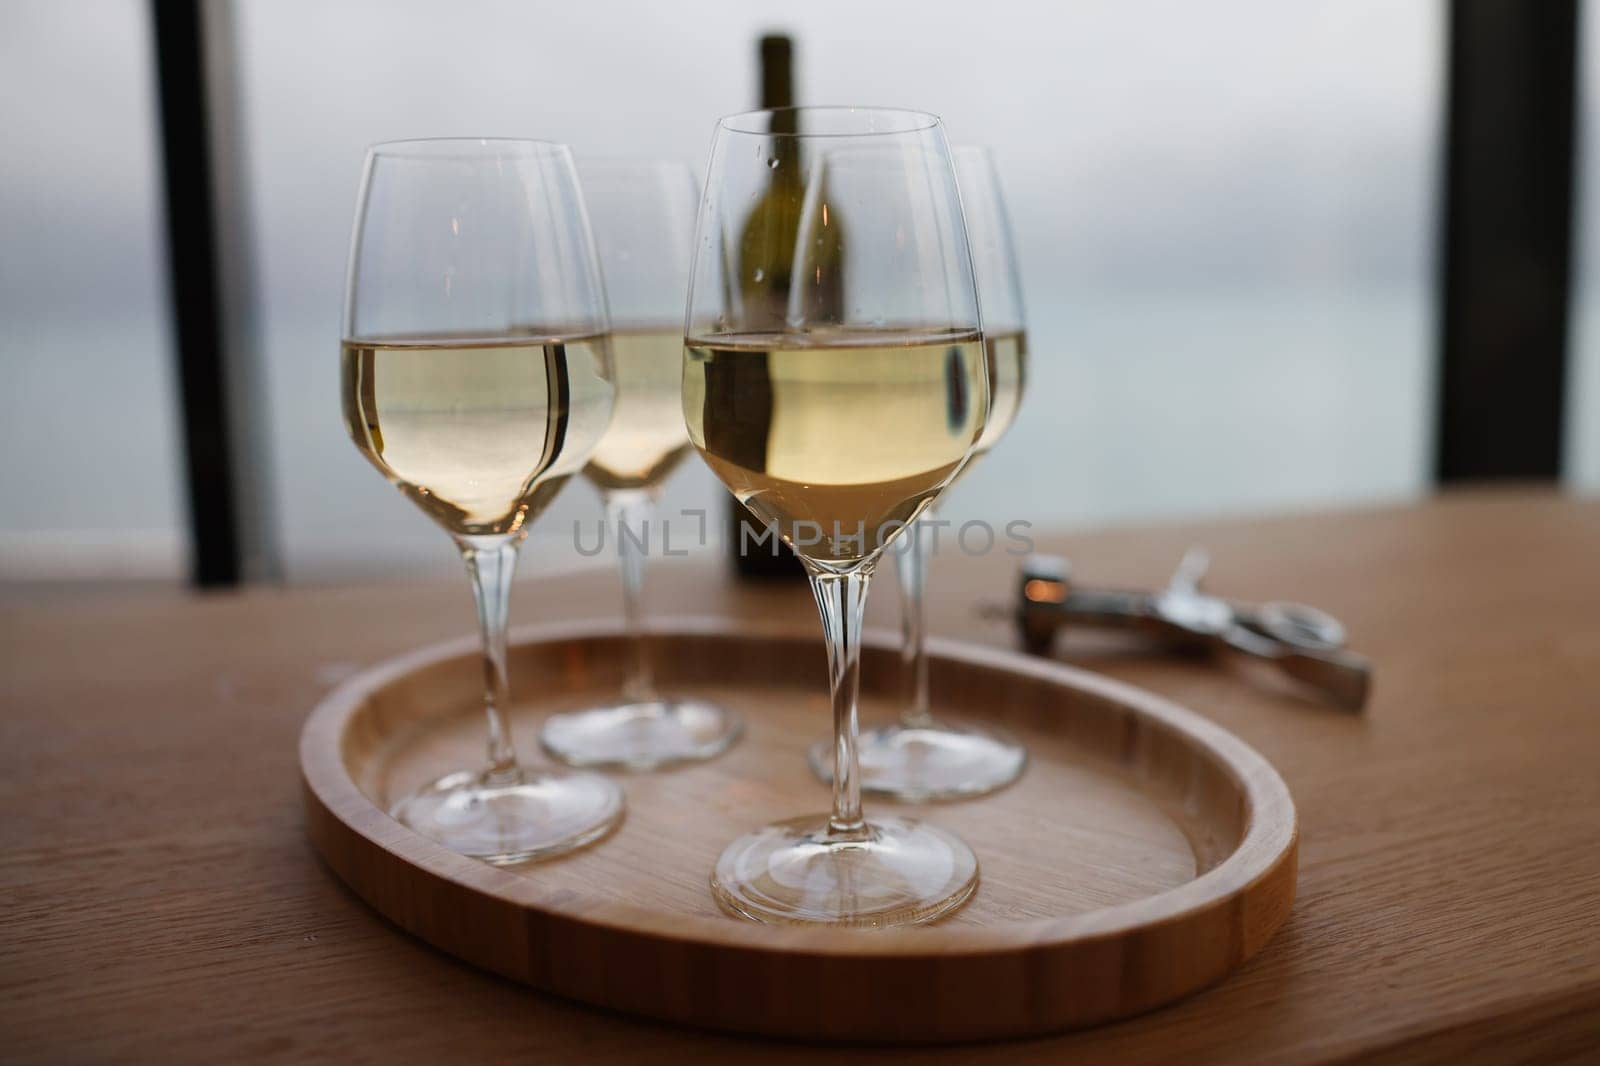 Lot of glasses with white wine and bottle standing on table in restaurant closeup by kuprevich